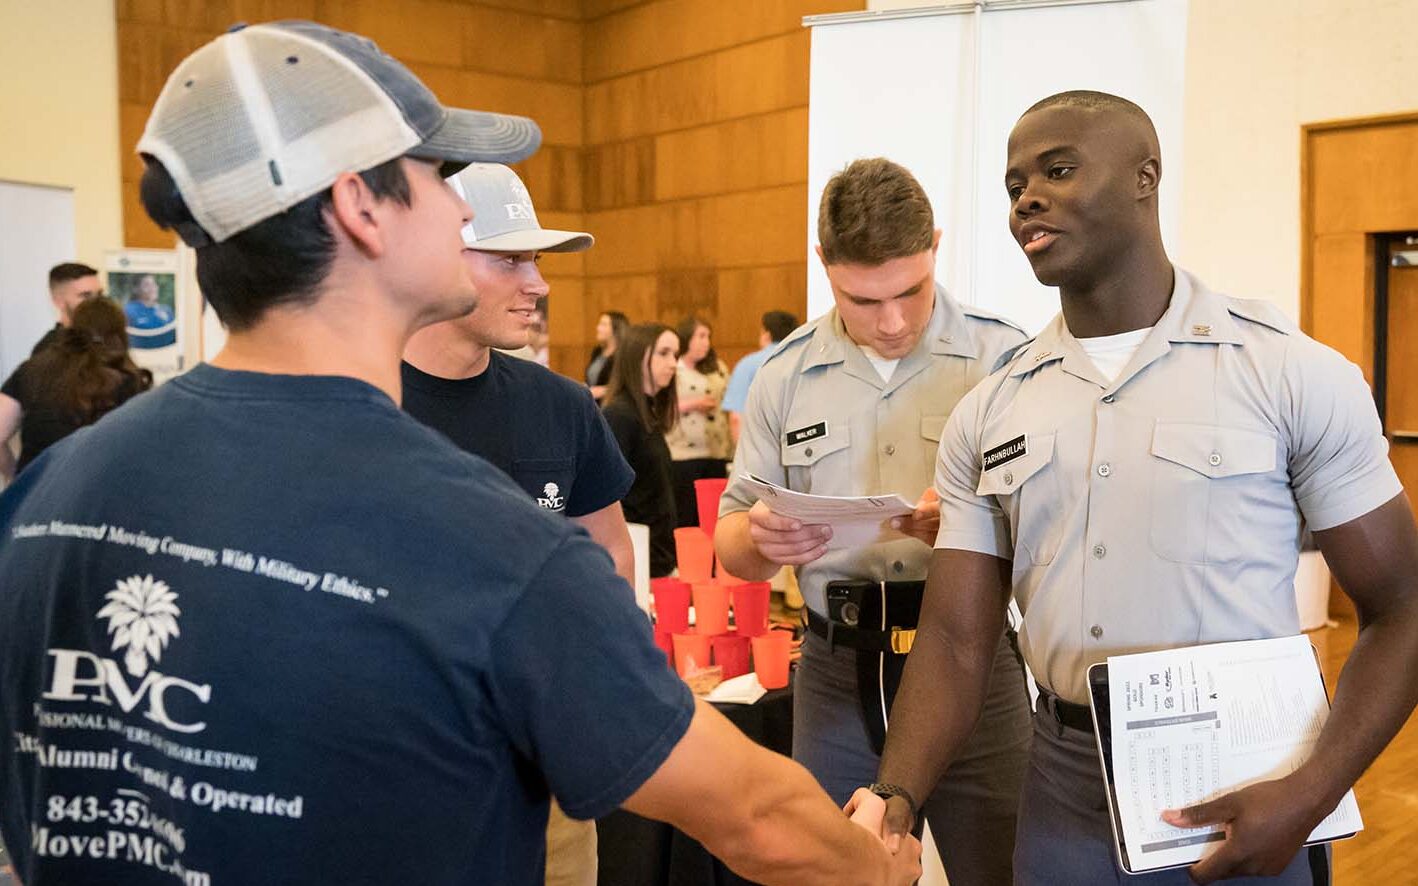 A Cadet shaking a potential employers hand at a career fair